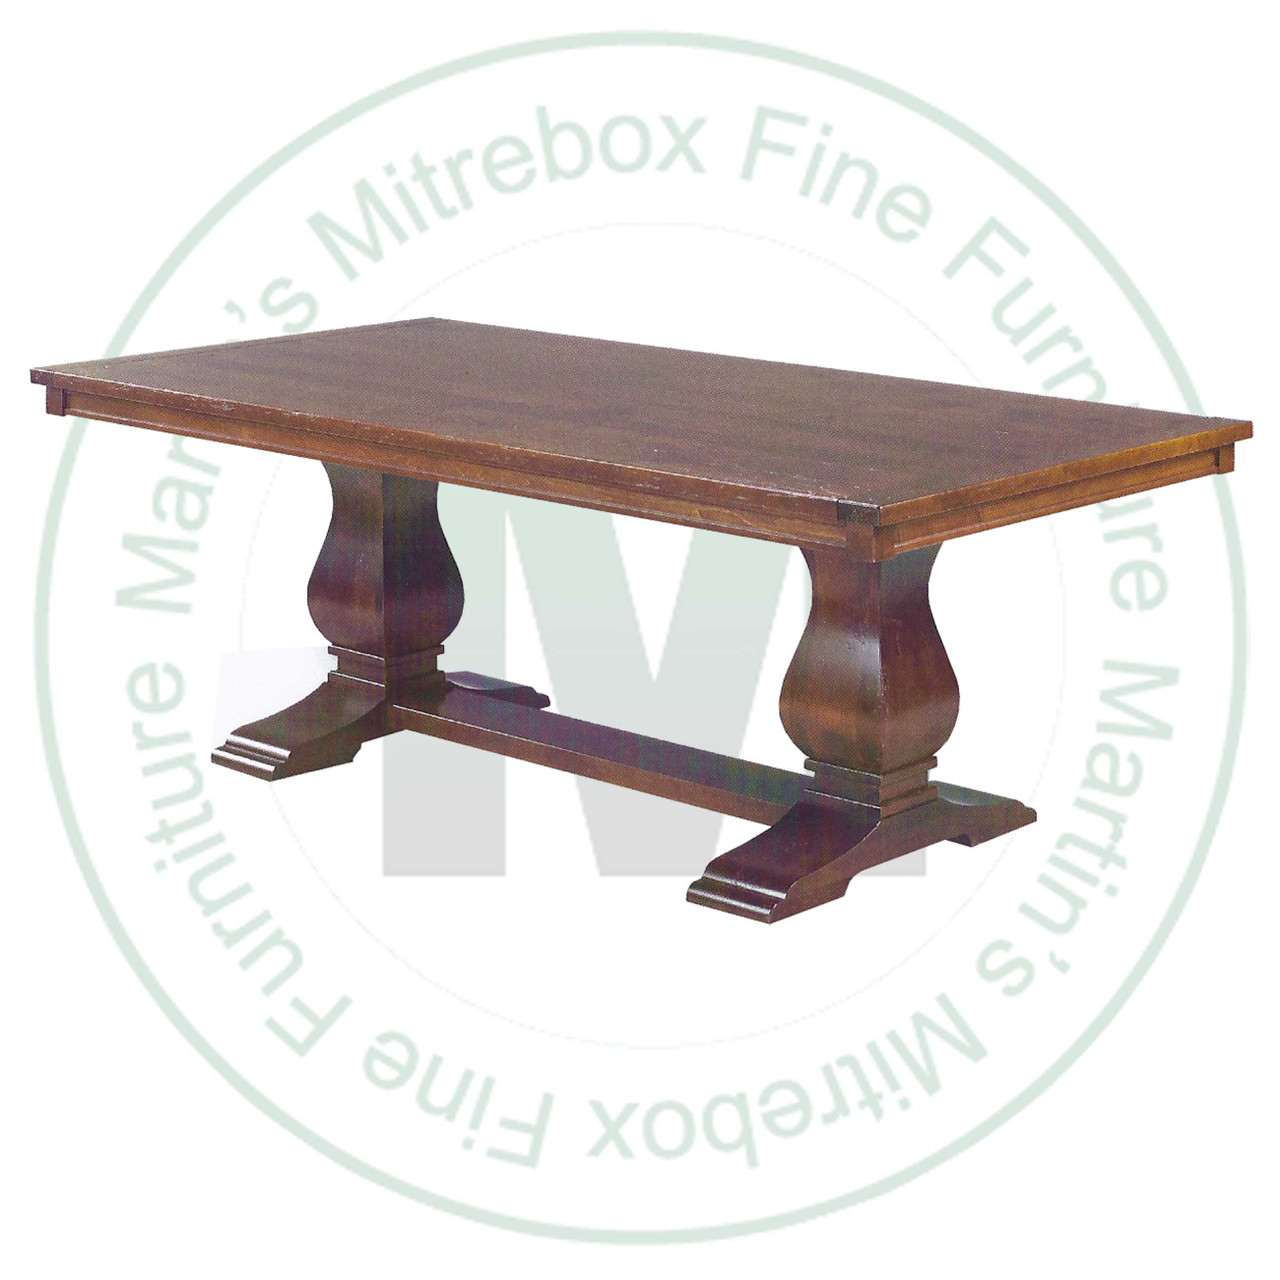 Maple Socrates Double Pedestal Table 42''D x 84''W x 30''H With 2 - 12'' Leaves. Table Has 1.25'' Thick Top